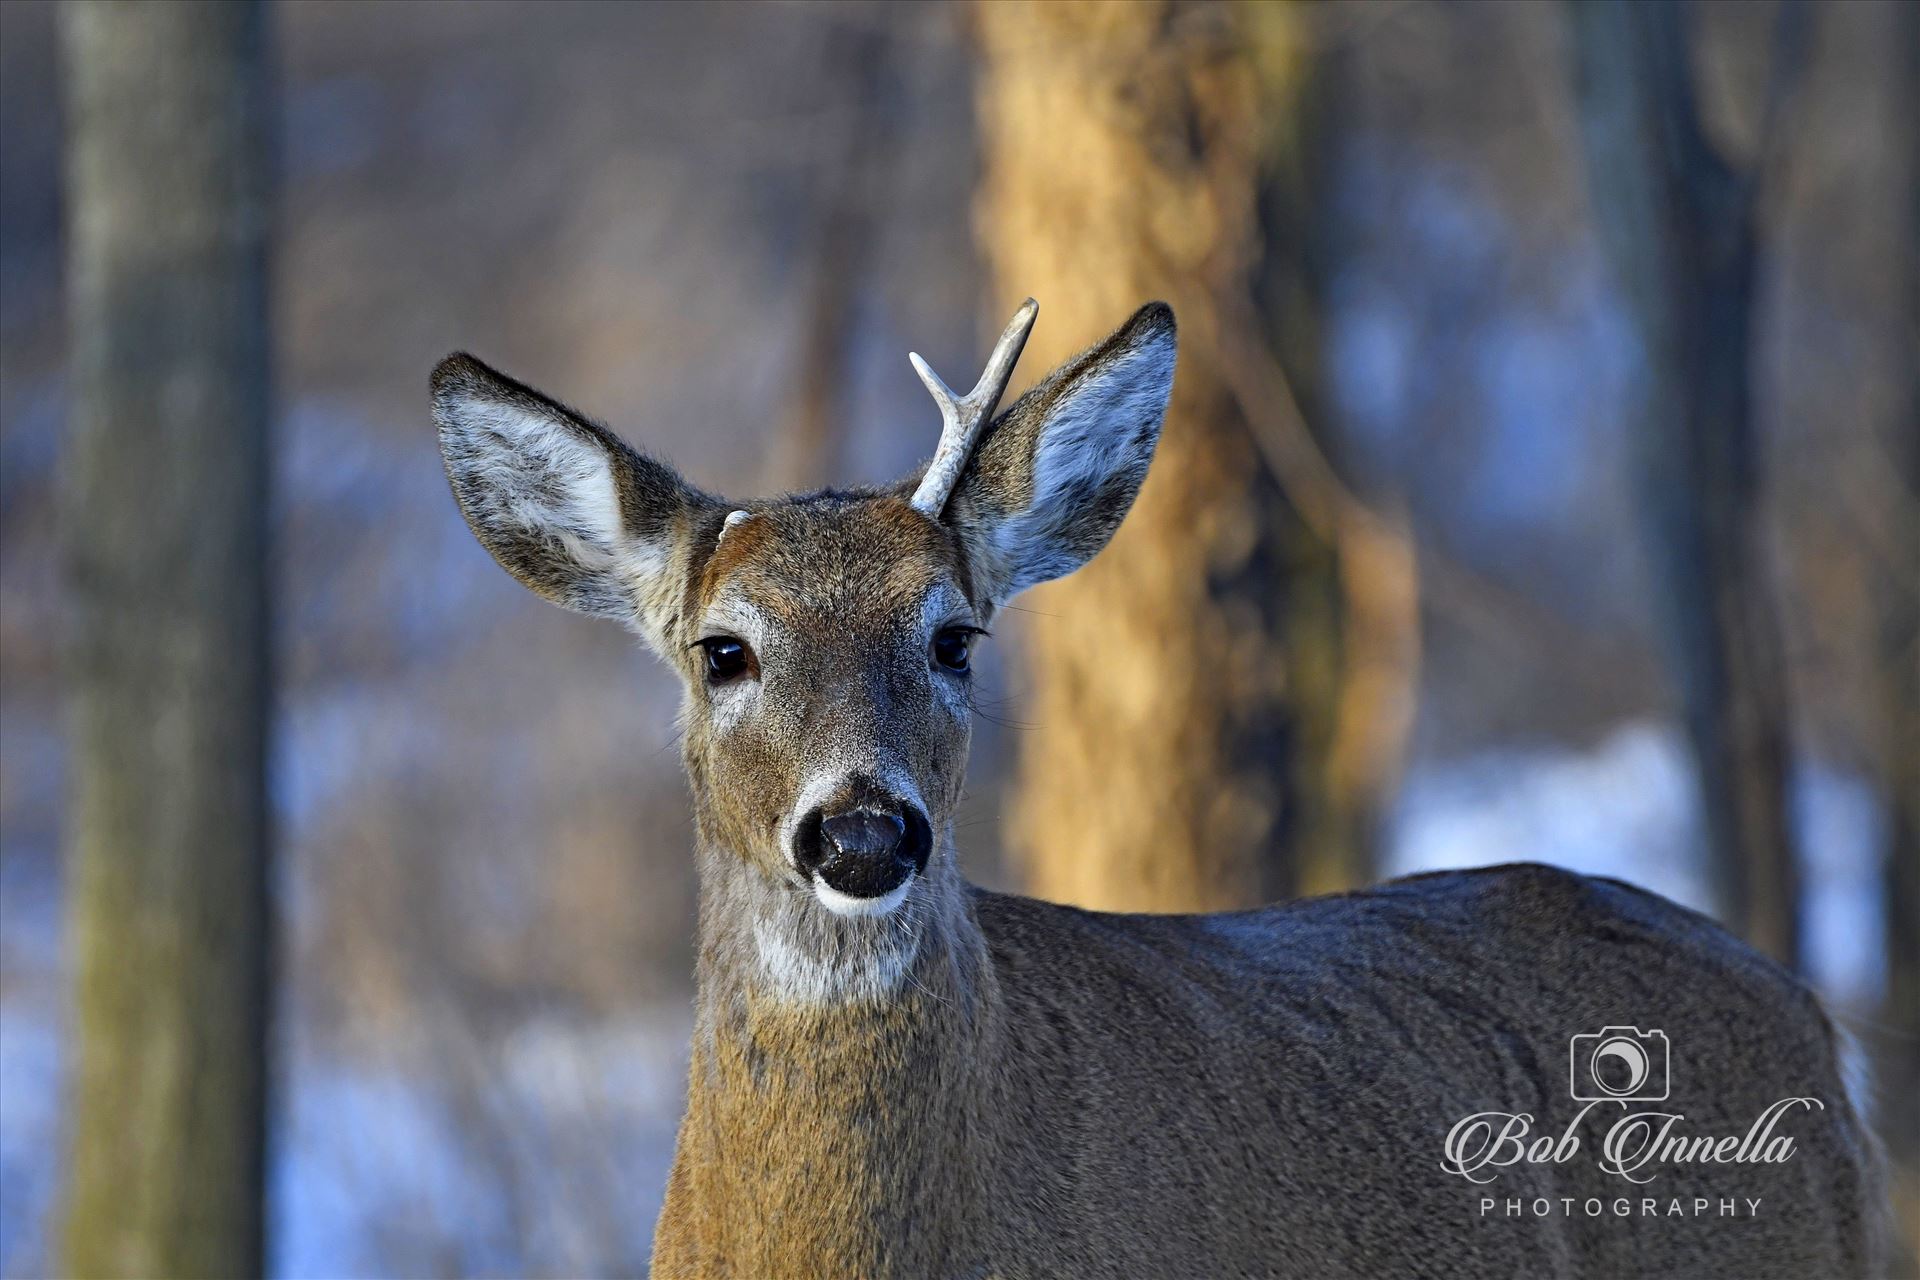 Small Whitetail Buck - He has shed one antler, taken late March 2017 in the Wilds Of Pennsylvania by Buckmaster